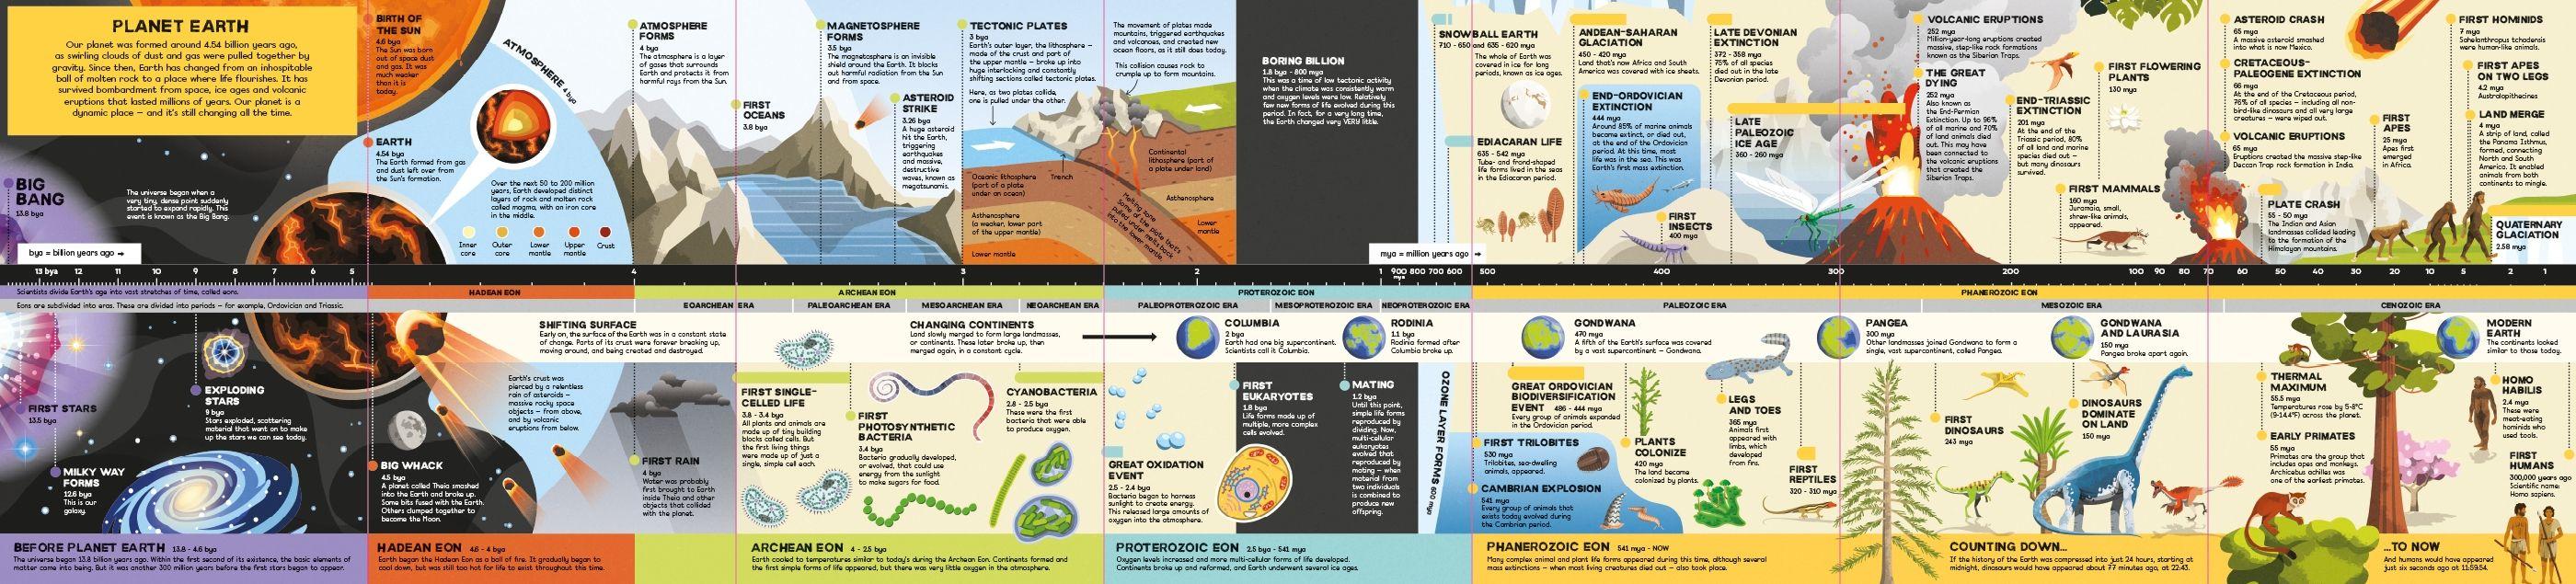 Fold-out Timeline Of Planet Earth